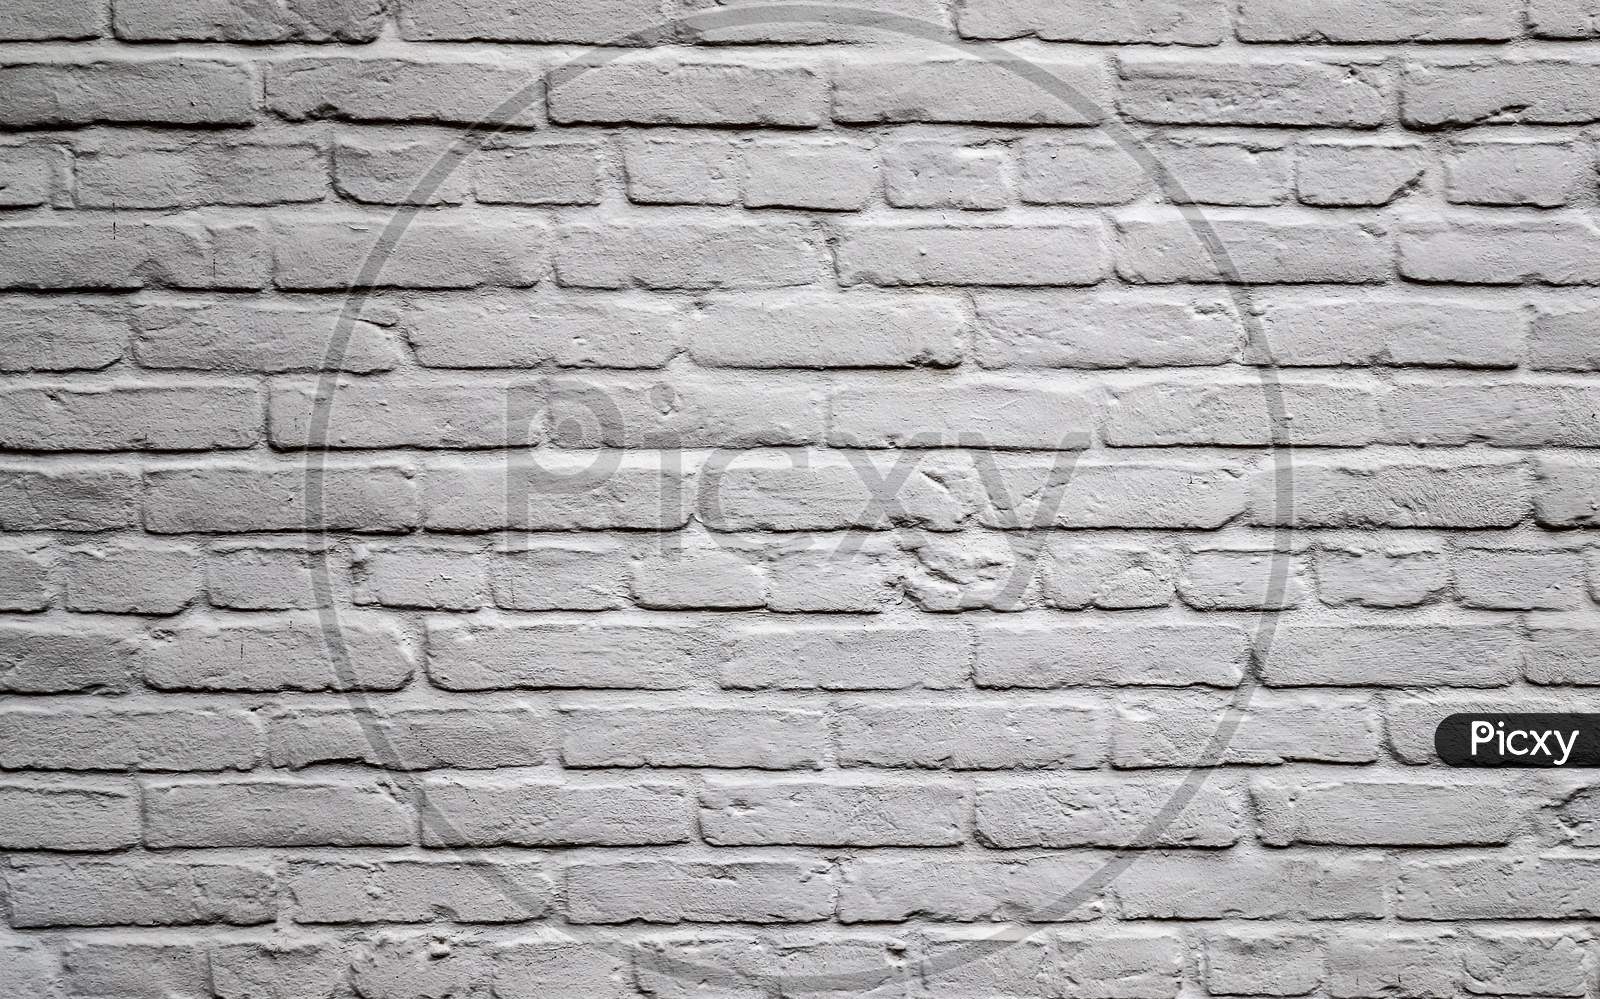 Colorful brick wall. Texture of old weathered historical brick wall panoramic background.